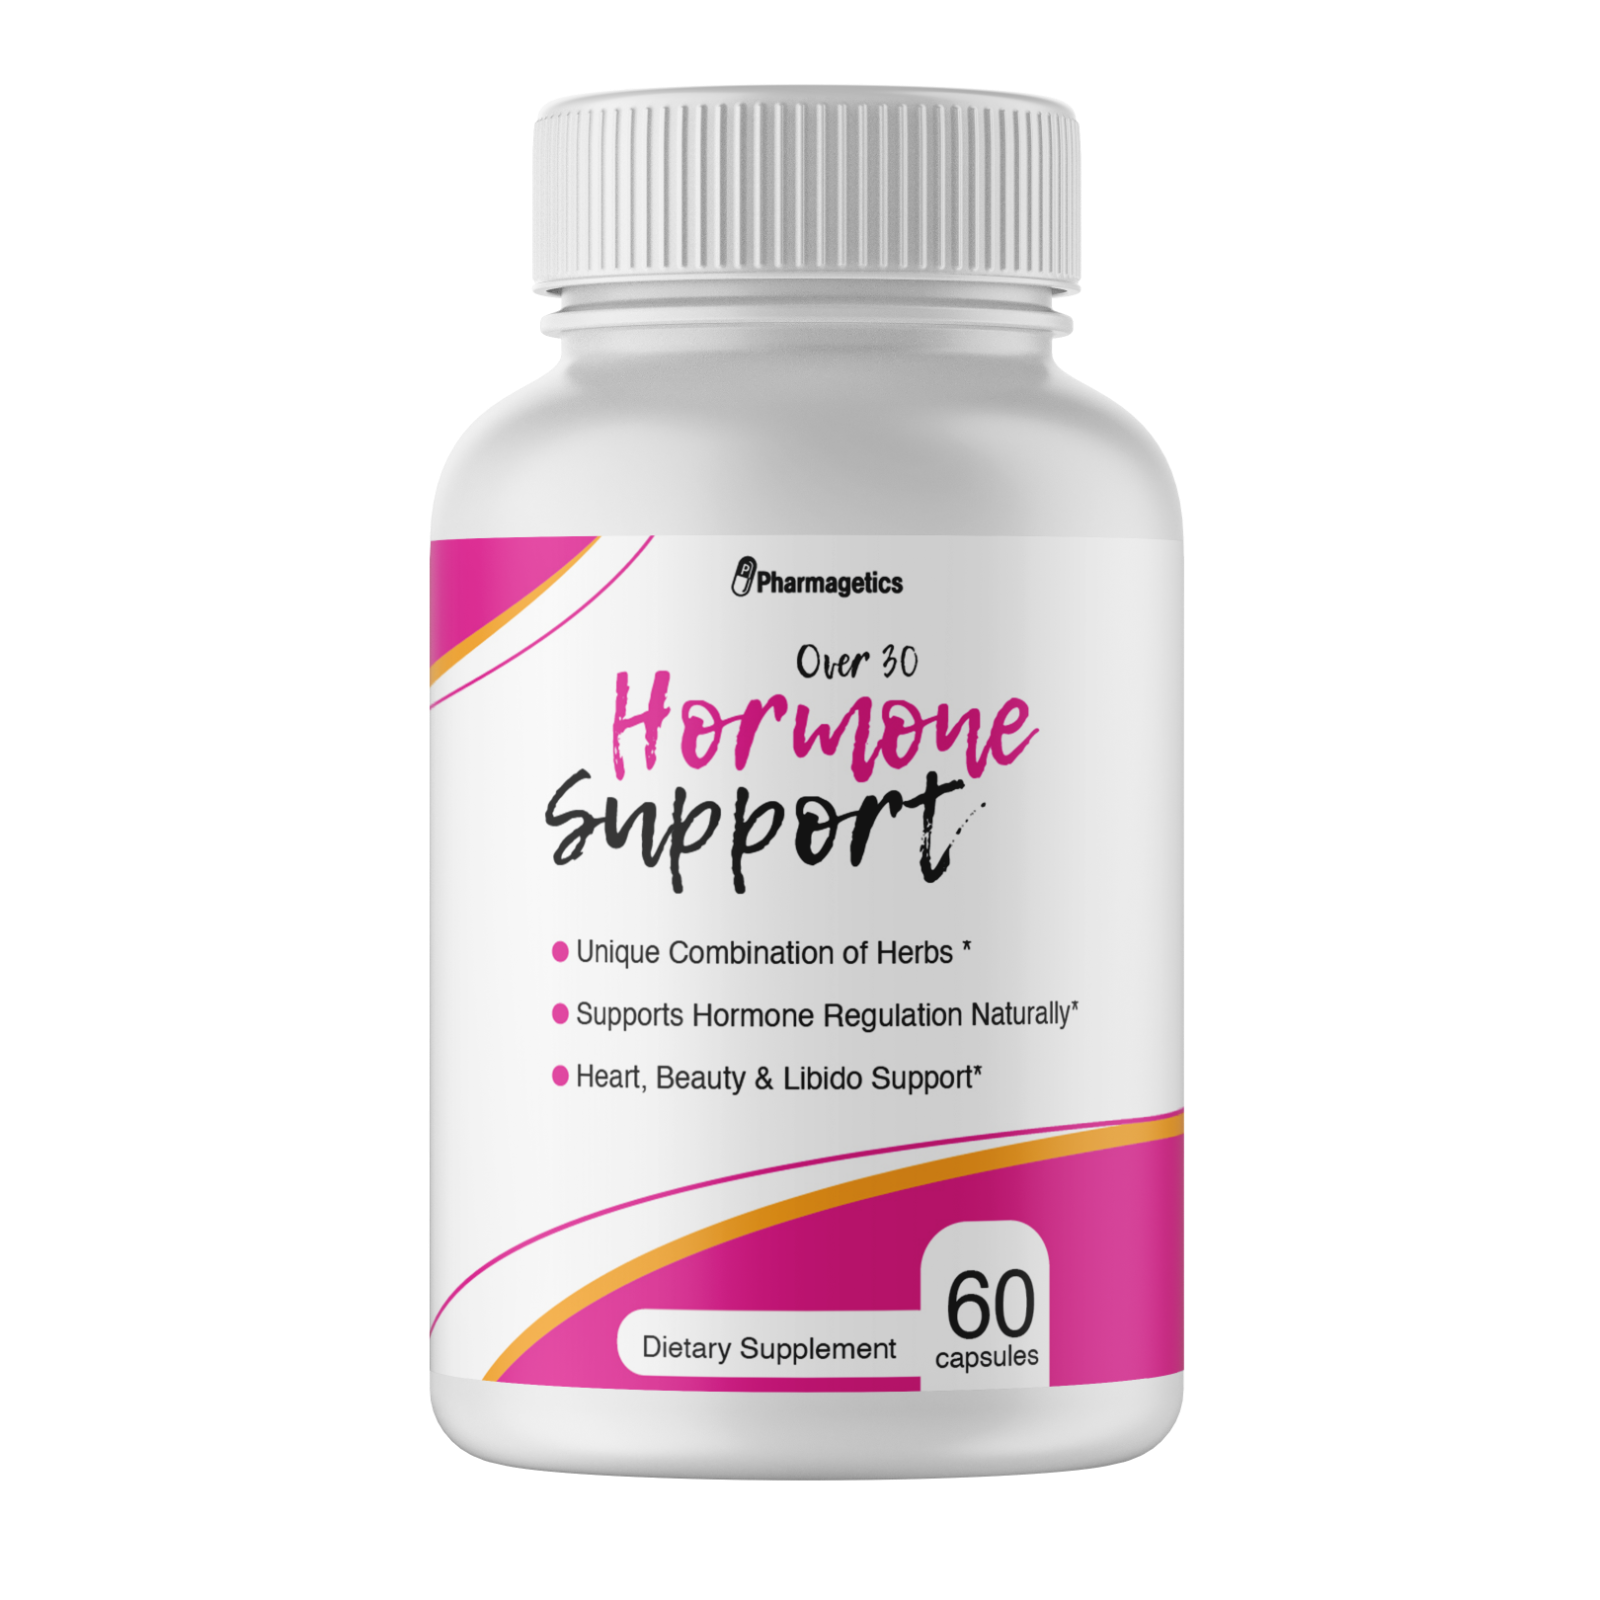 Over 30 Hormone Support Dietary Supplement - 60 Capsules